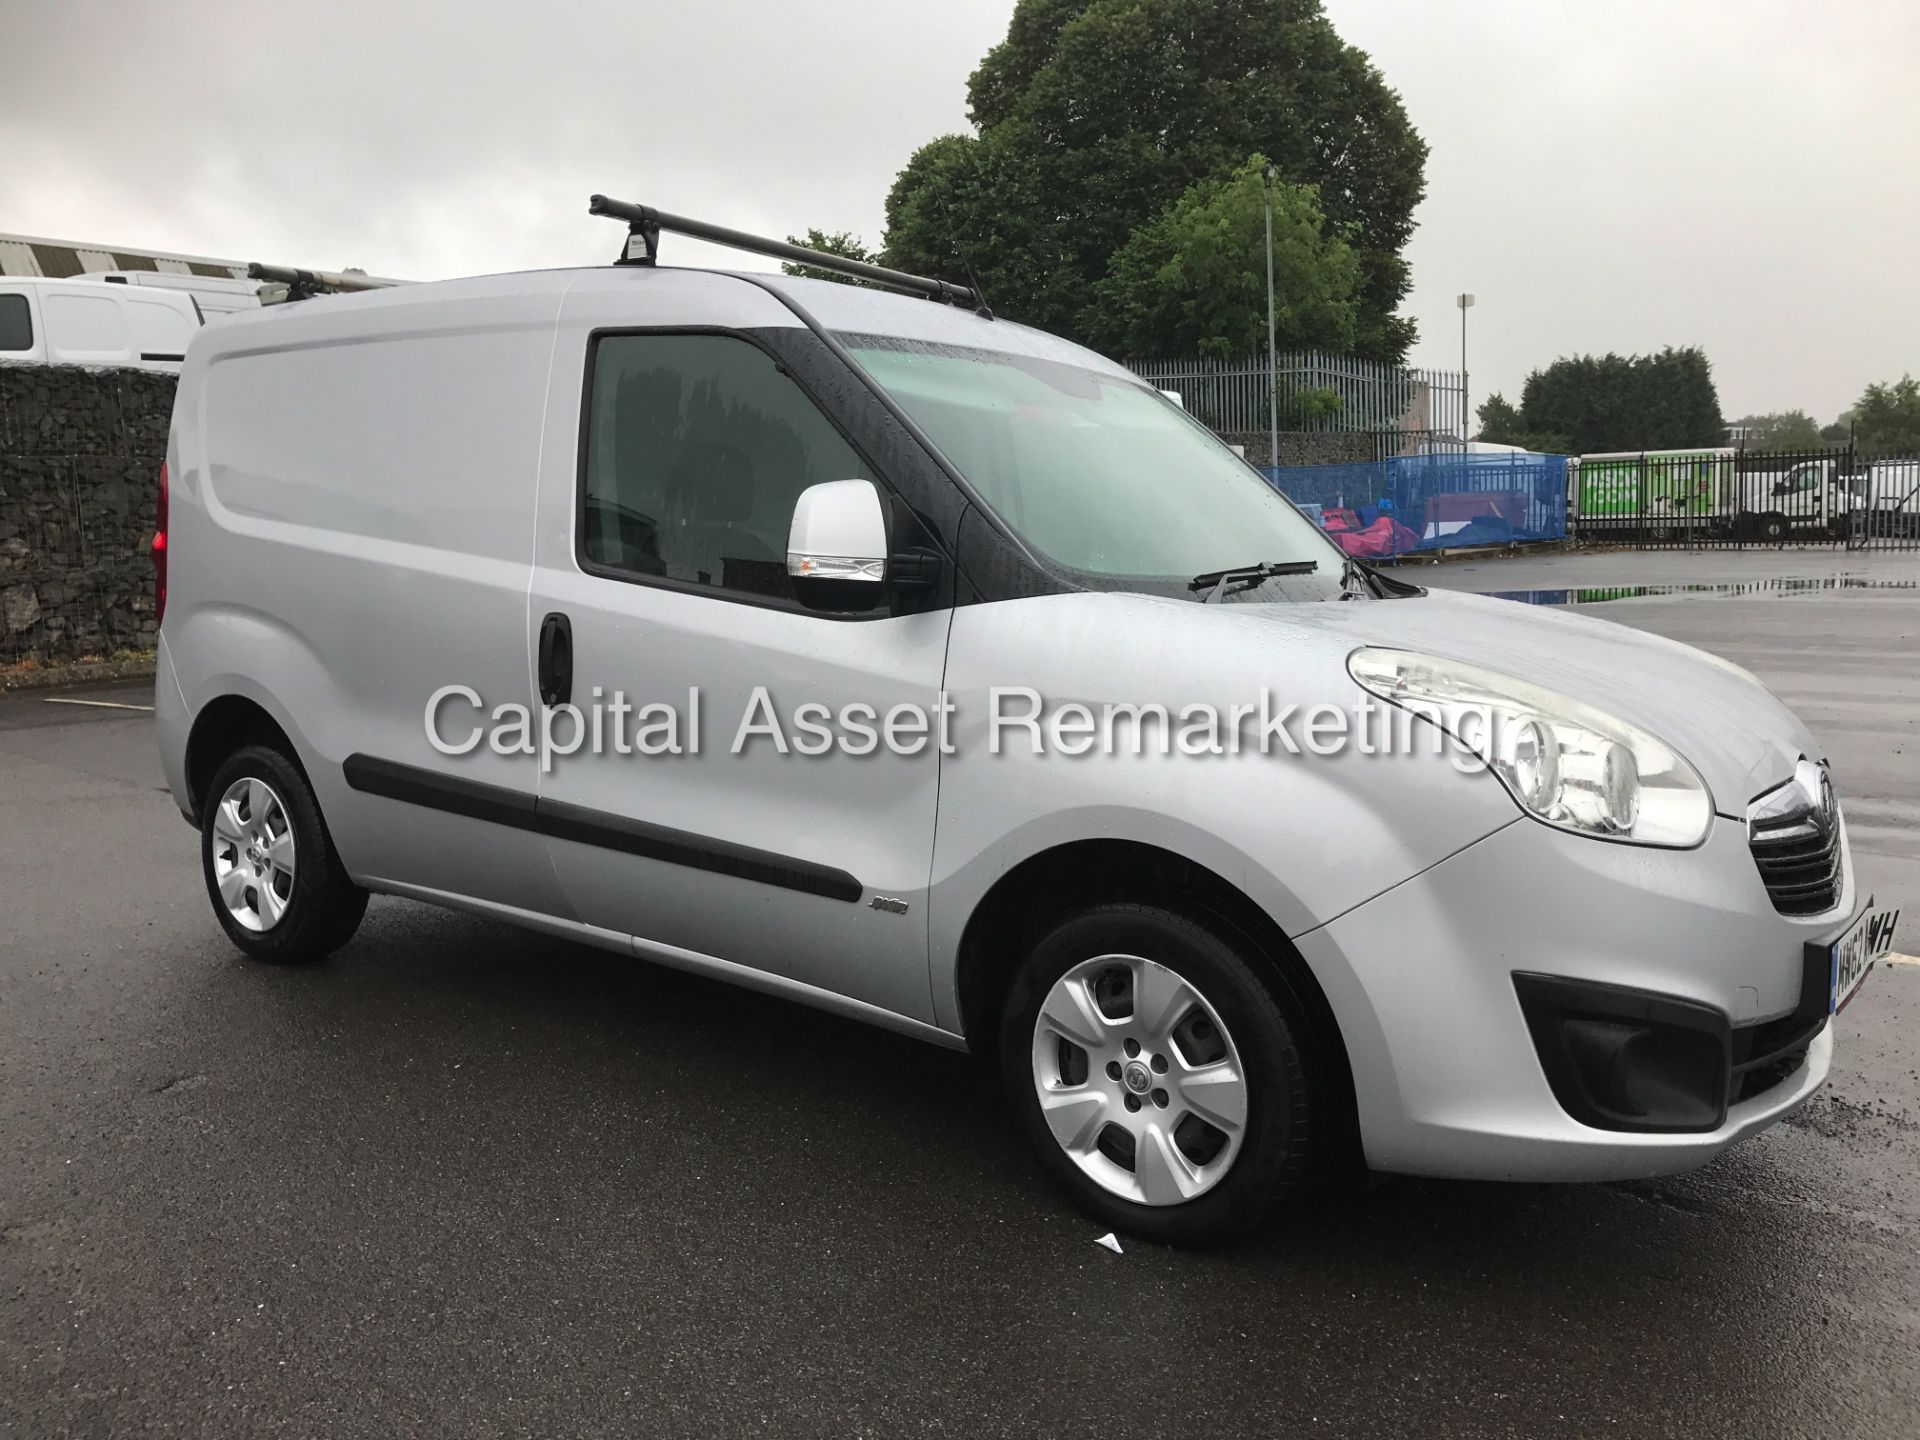 On Sale VAUXHALL COMBO 1.3CDTI "SPORTIVE - 90BHP" 1 OWNER (2013 MODEL) AIR CON - ELEC PACK - Wow!!!! - Image 3 of 15